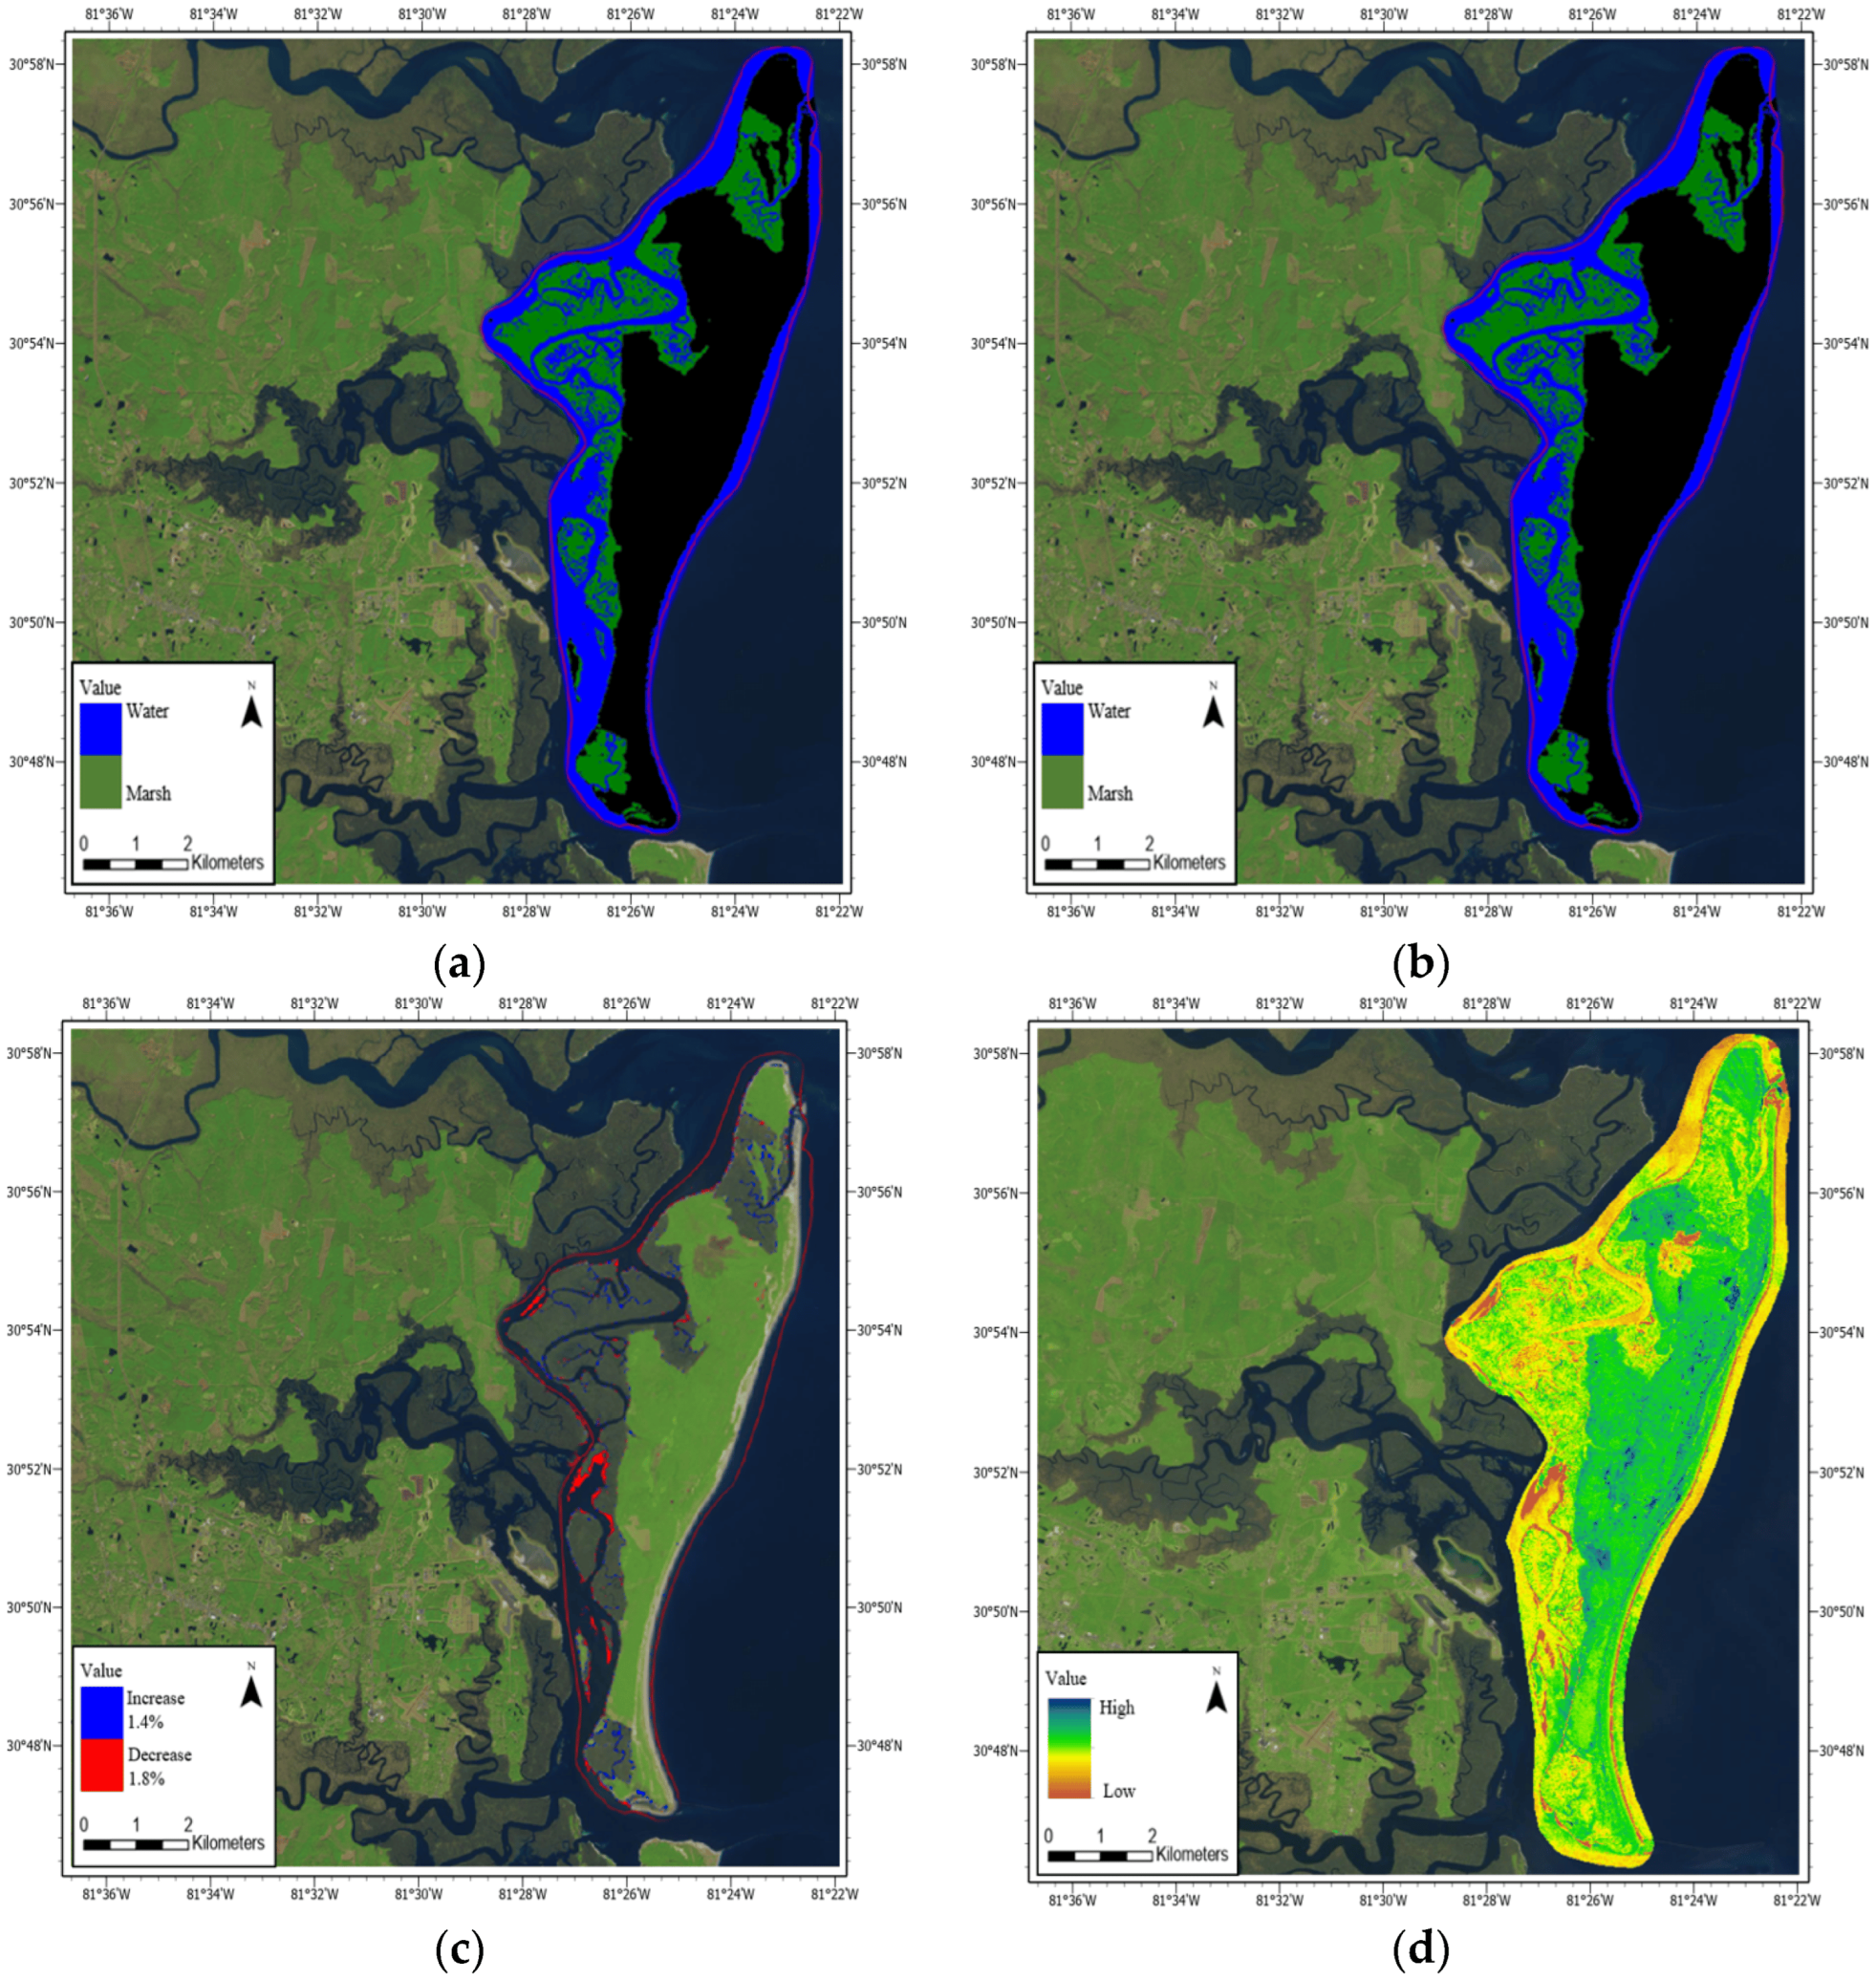 Maximum likelihood classification of Cumberland Island National Seashore from 2019 (a) to 2020 (b). (c) Change detection analysis of marsh land. (d) NDVI salt marsh assessment determining differential reflection of the vegetation density and relative growth using spectral reflectivity of solar radiation from 2019 to 2020.